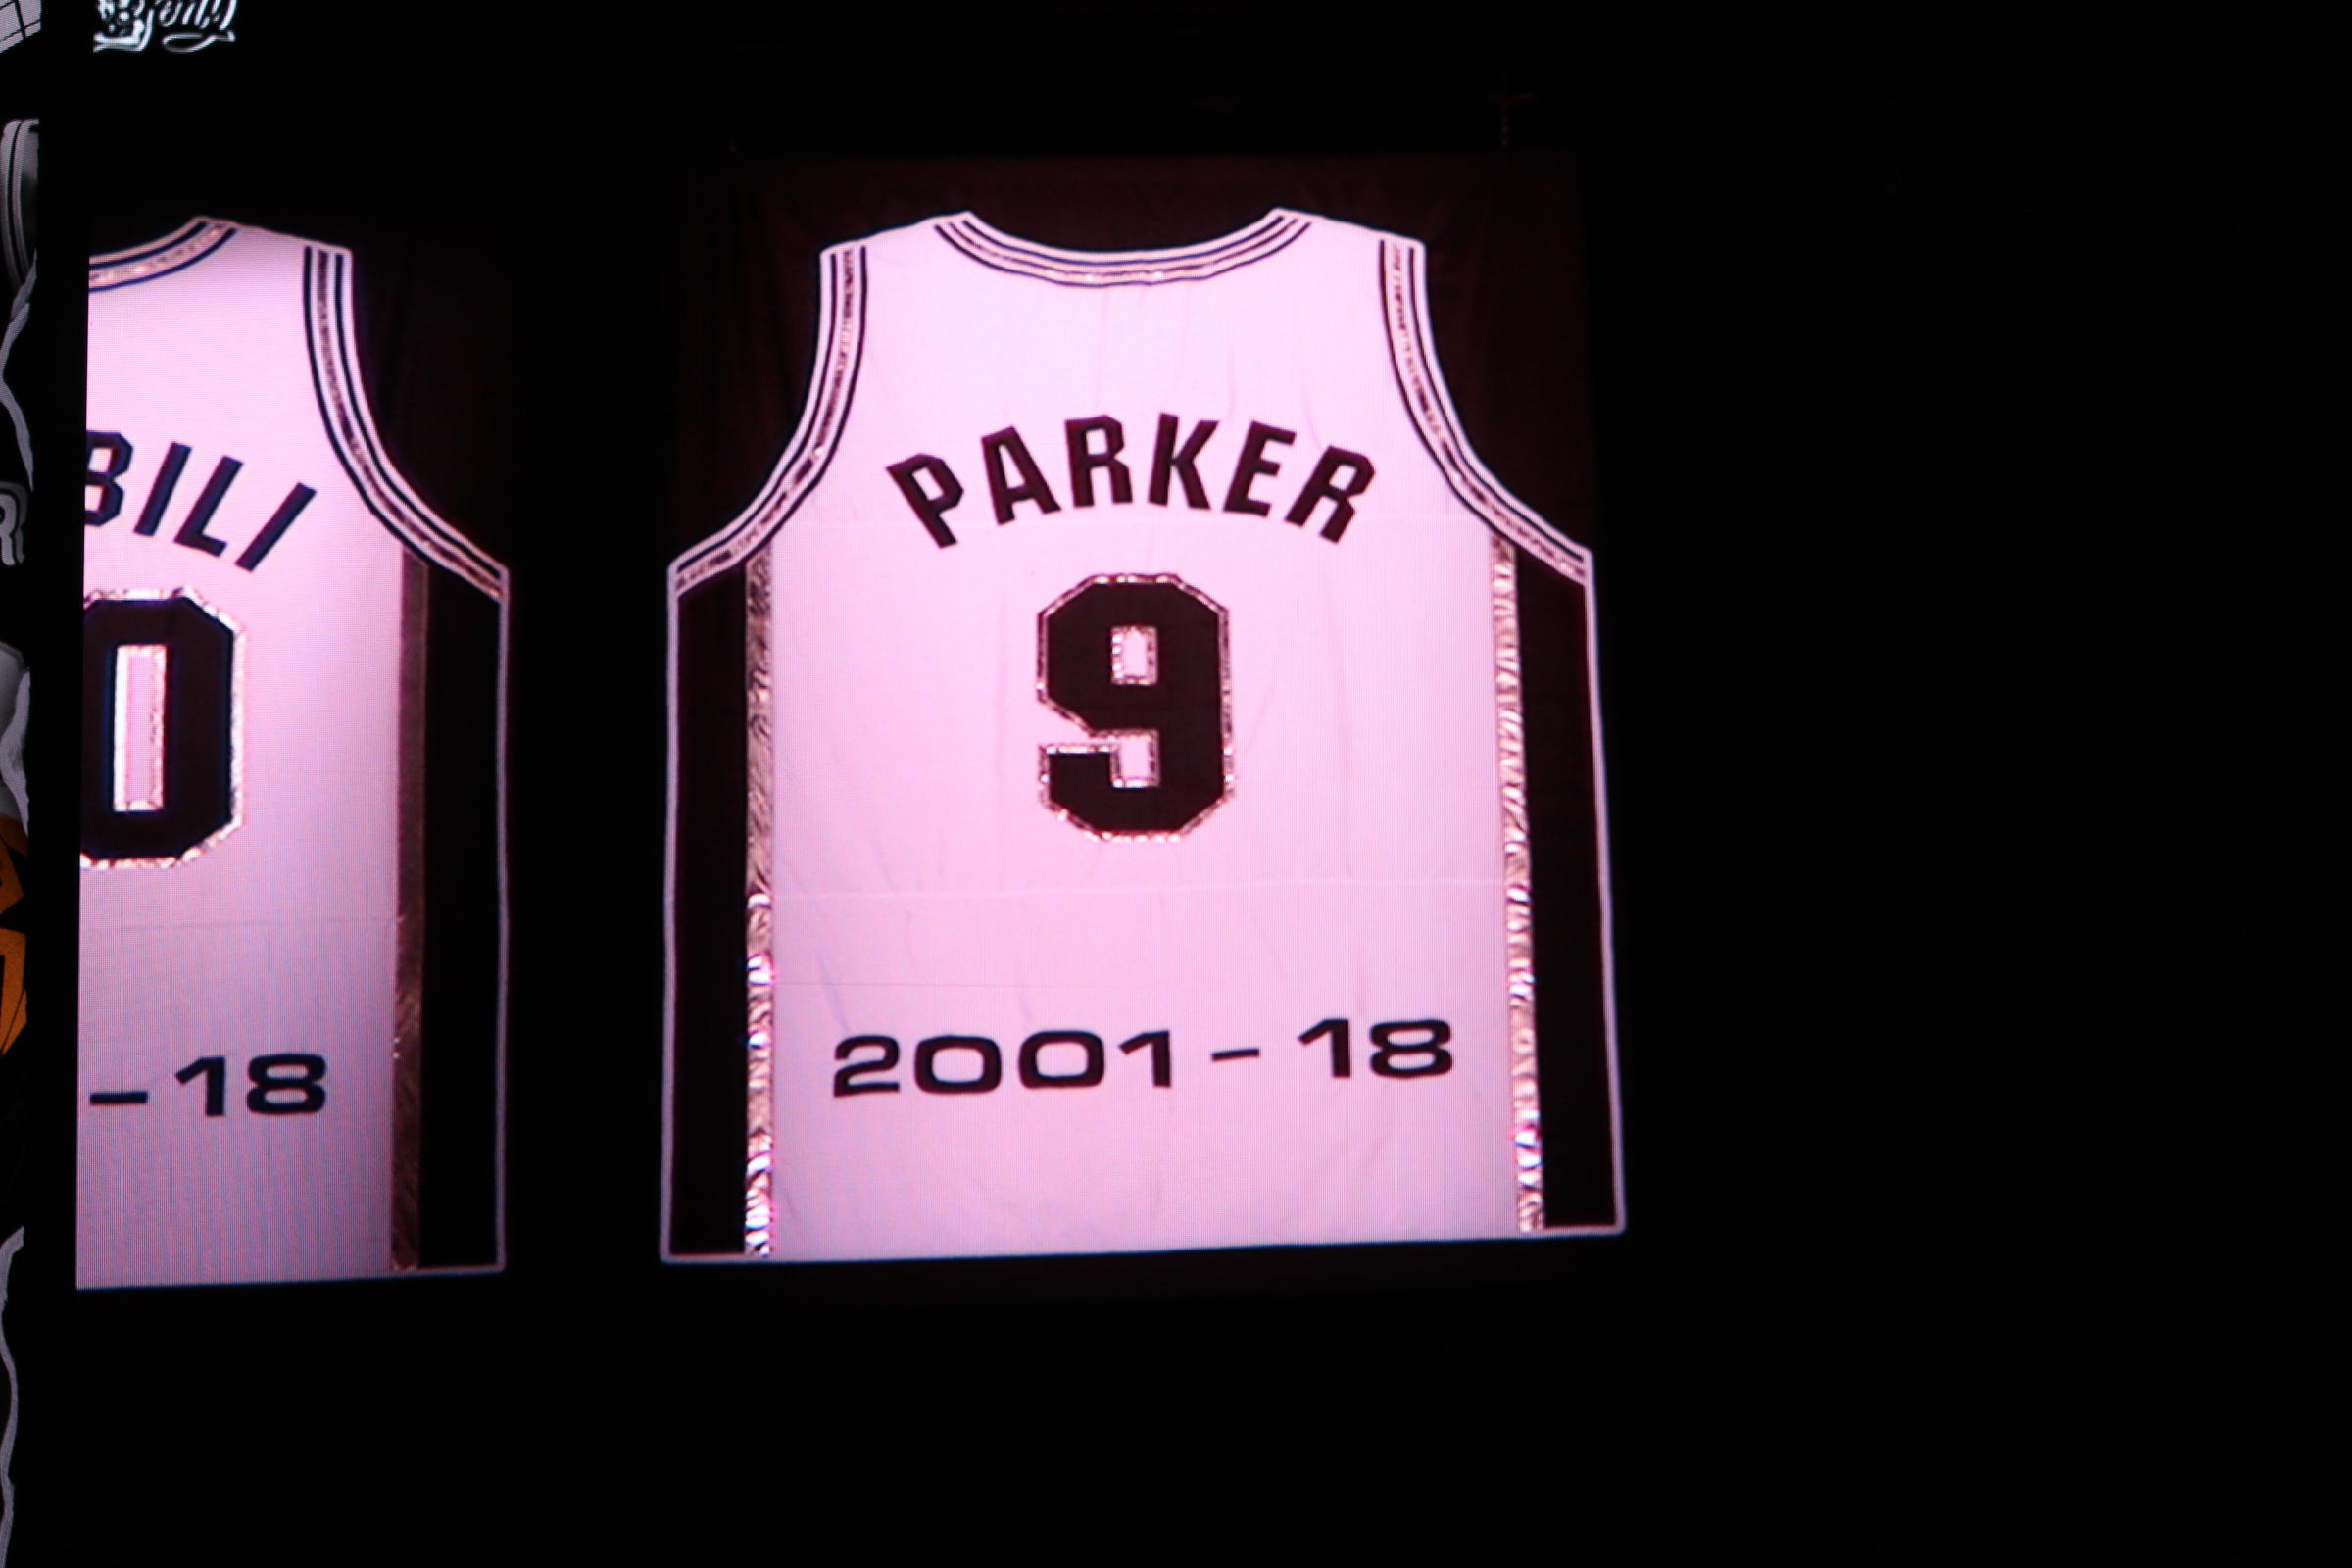 spurs retired jersey numbers